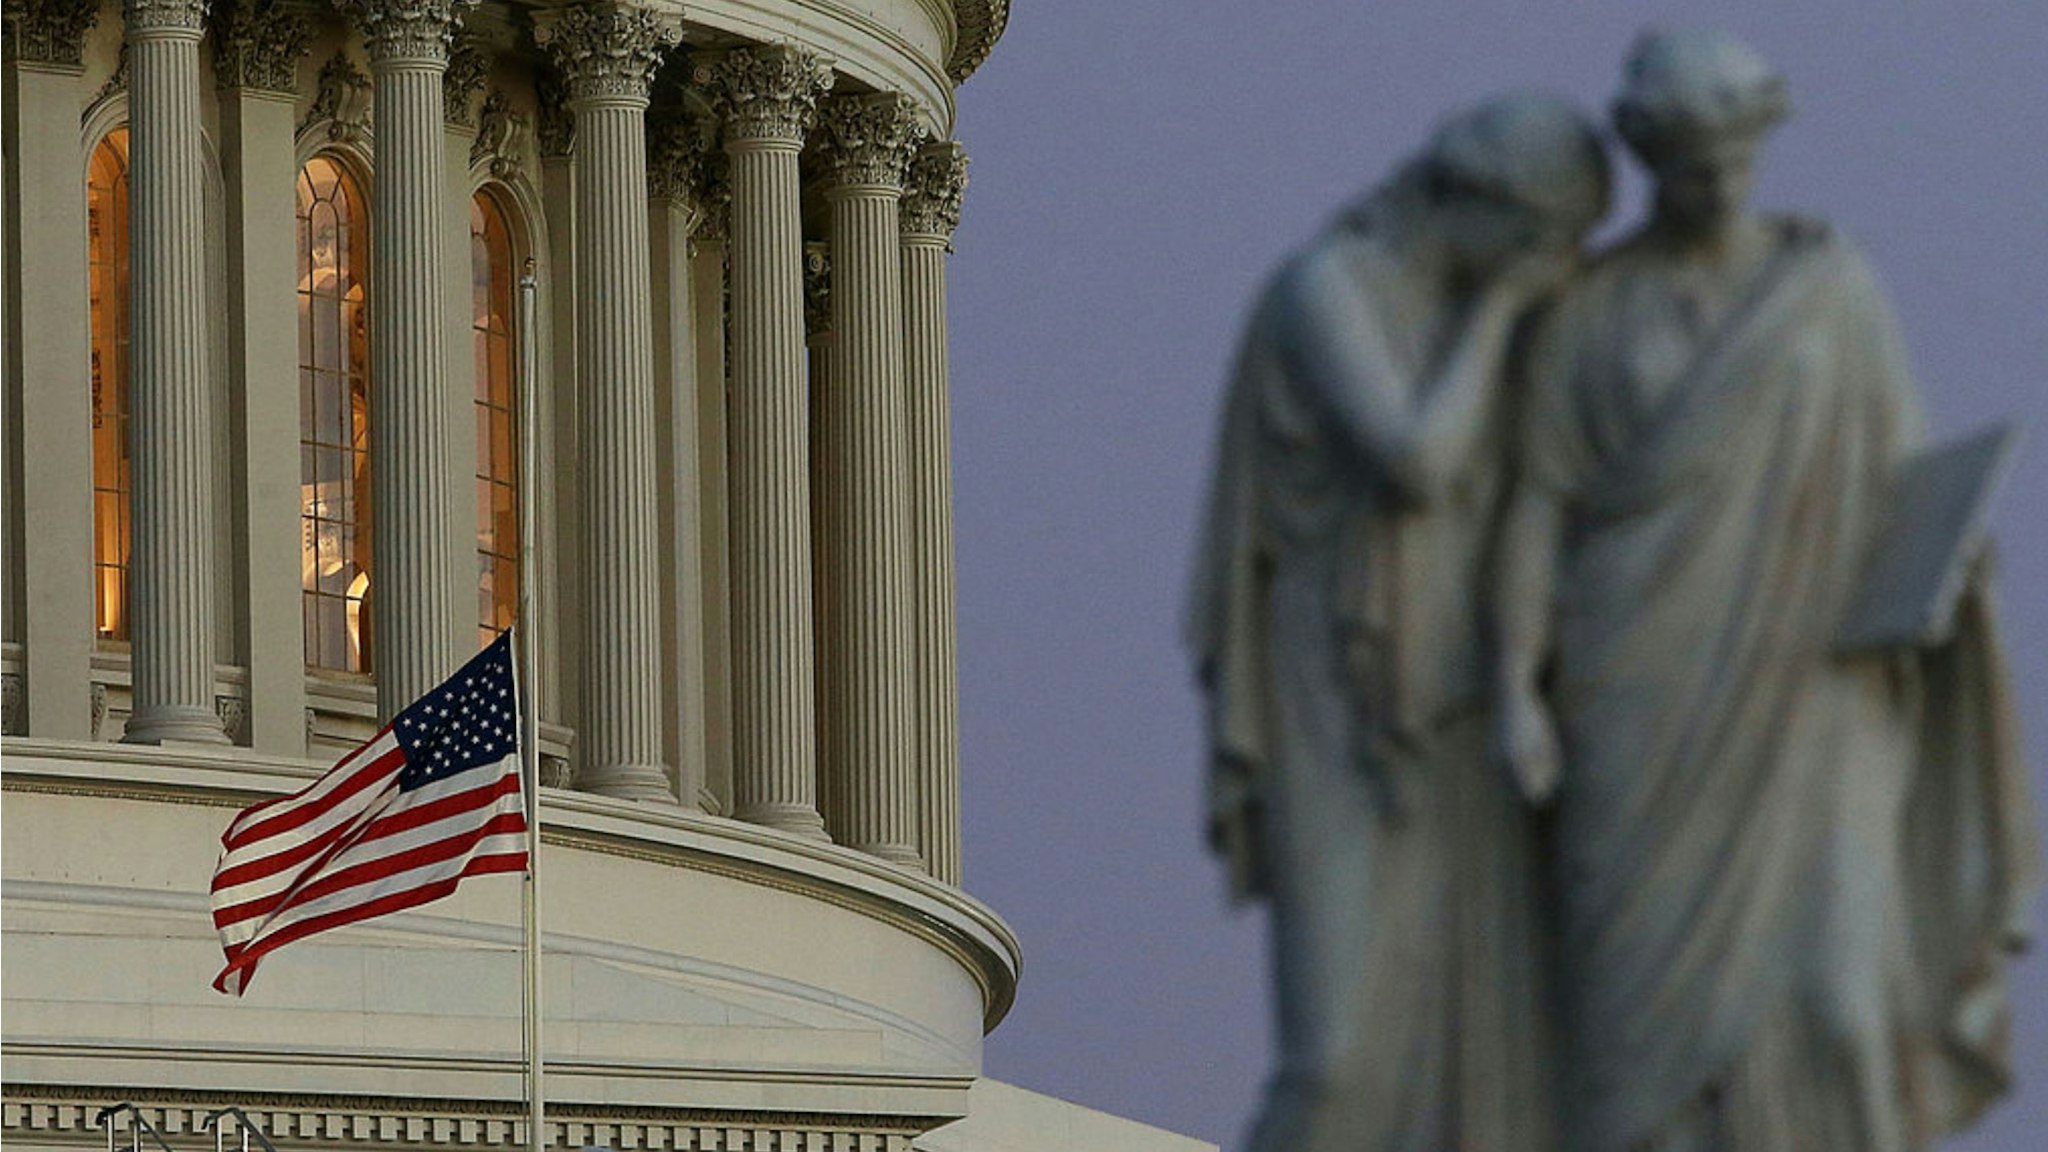 A flag at the U.S. Capitol flies at half staff after President Barack Obama ordered the action while speaking on the shootings at the Sandy Hook Elementary School December 14, 2012 in Washington, DC.